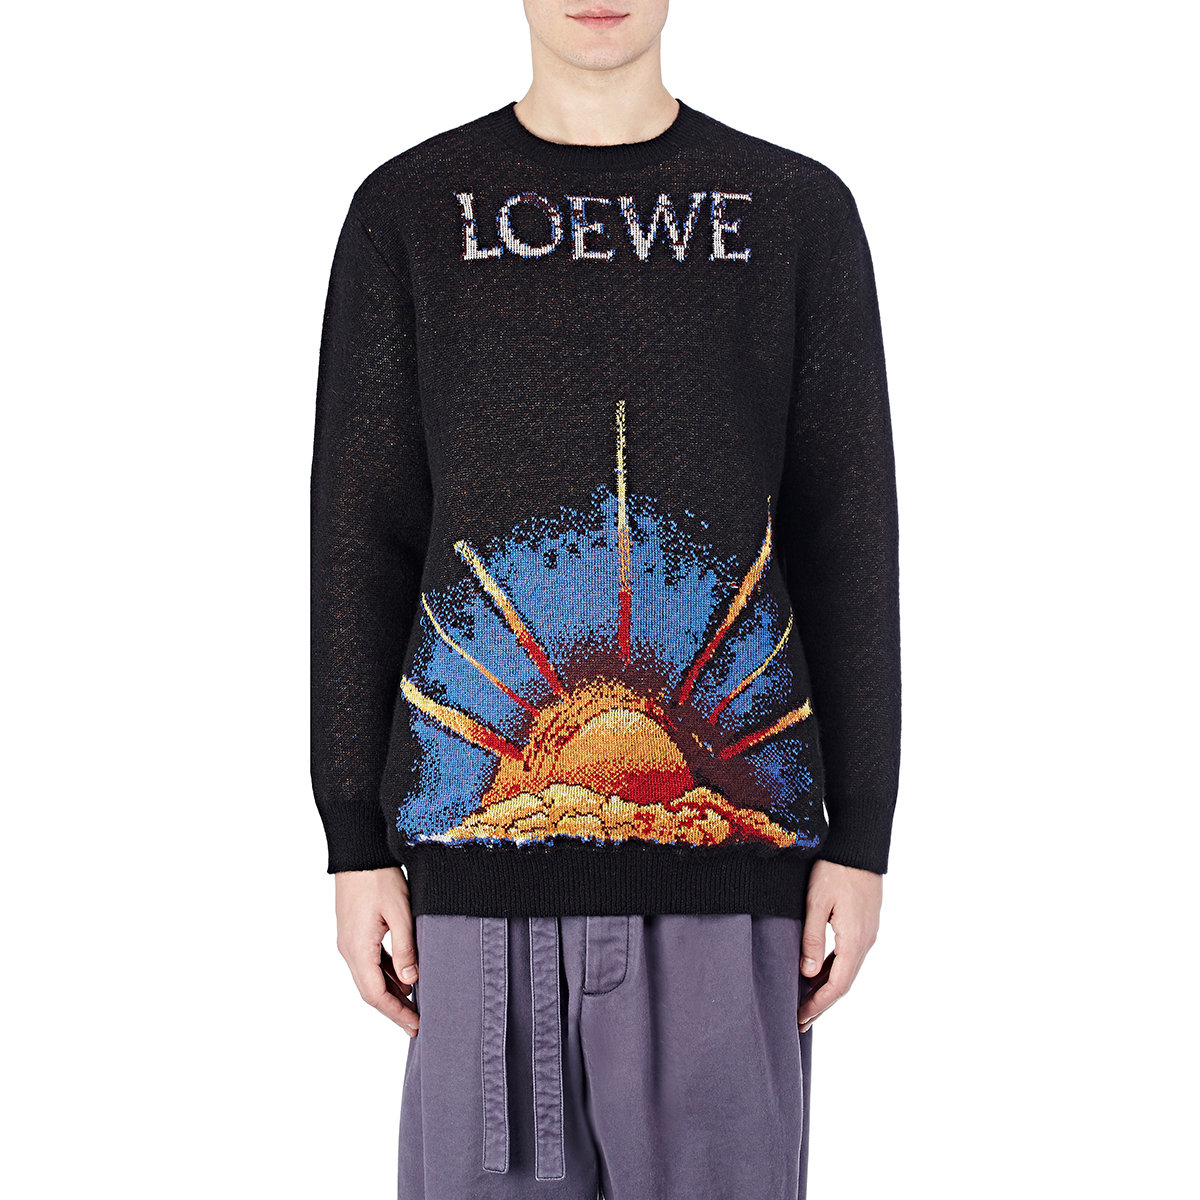 Lyst - Loewe Sunrise-graphic Intarsia-knit Sweater in Black for Men